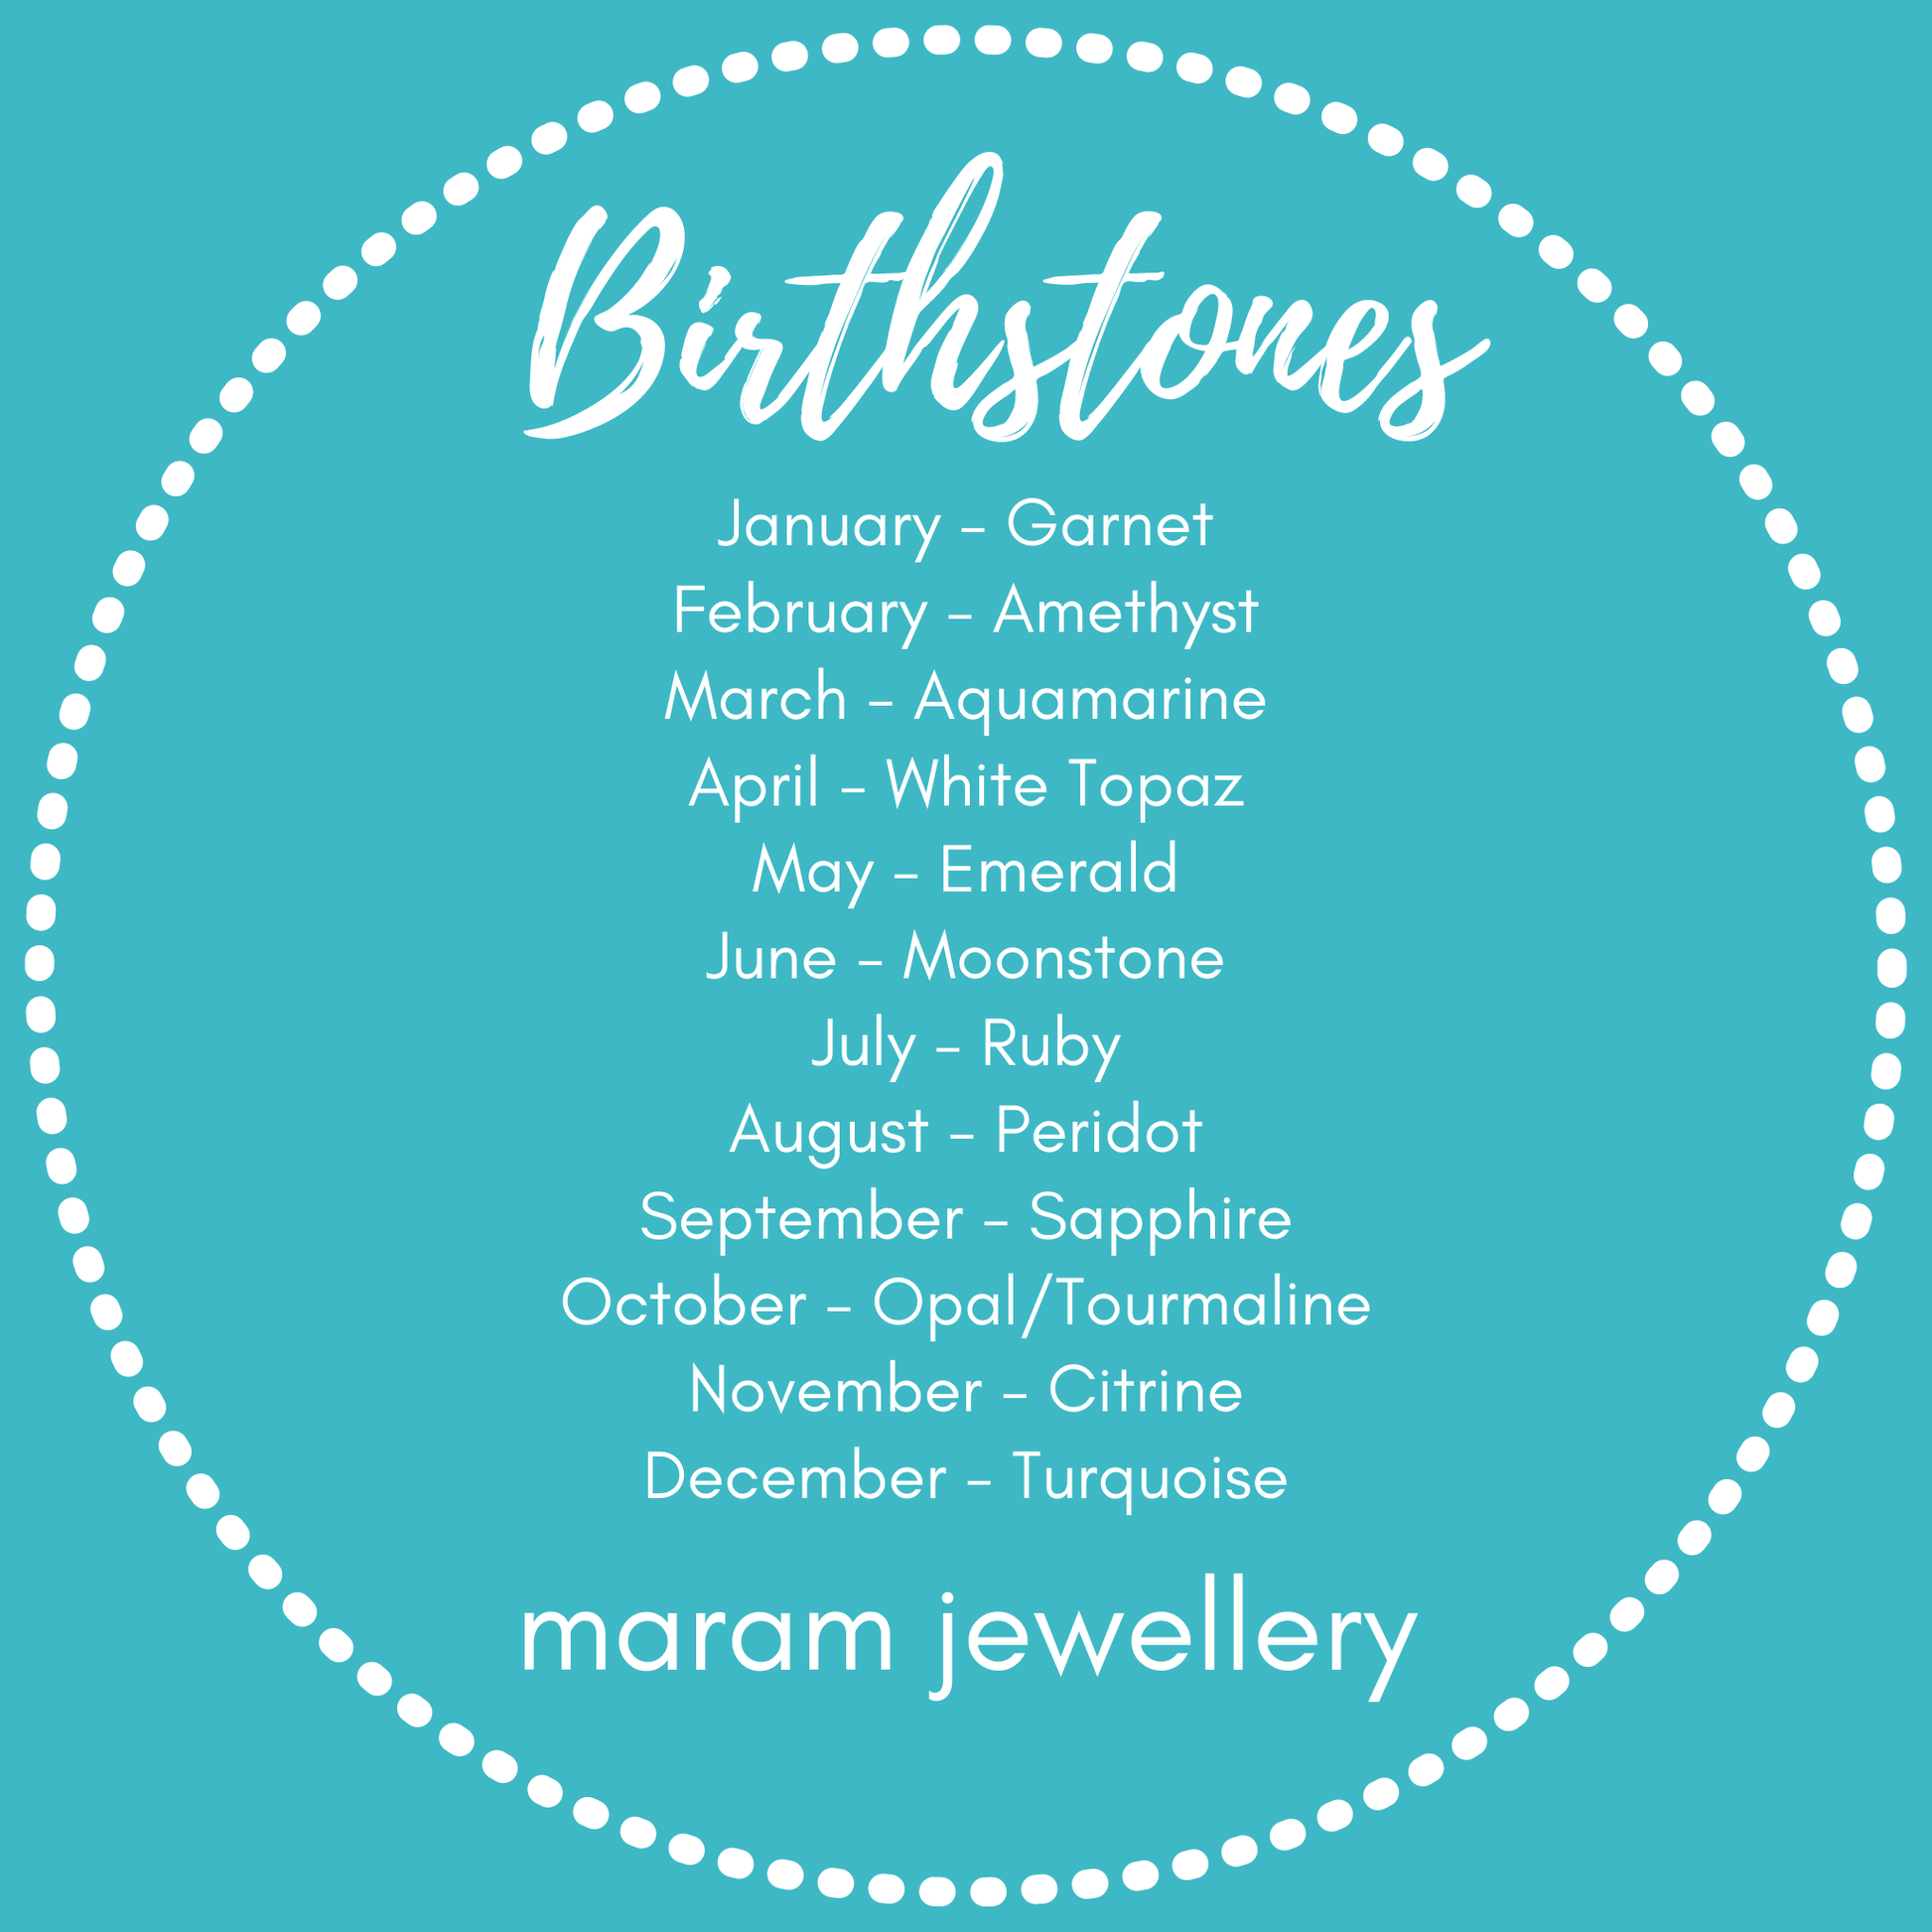 What's my Birthstone? A Birthstone graphic showing list of birthstones by month used by maram jewellery